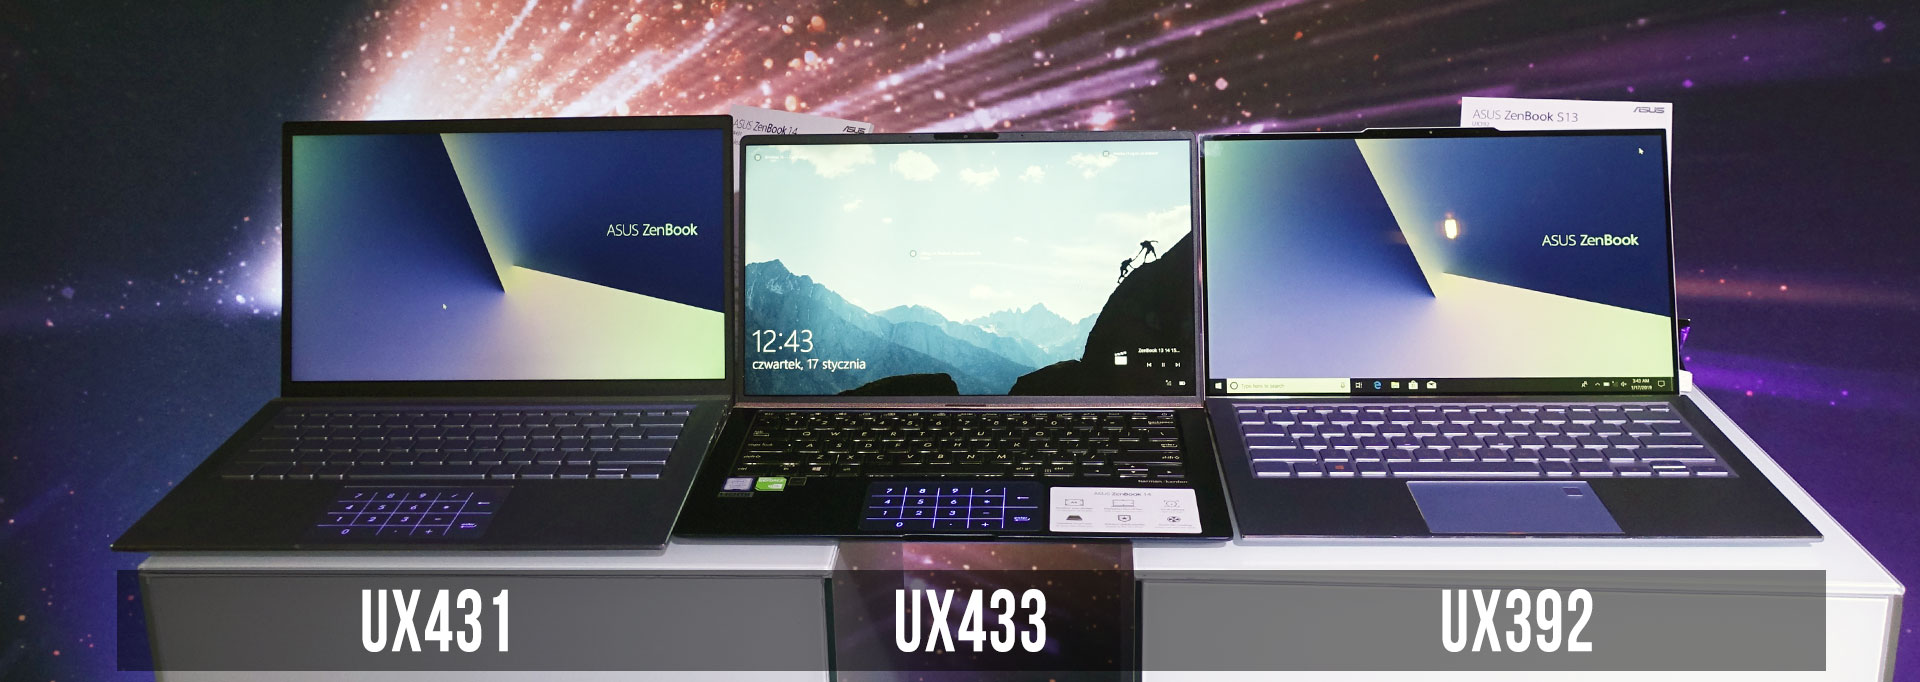 Fold Preferential treatment employment ASUS ZenBook 14 UX431FA impressions - what to expect, vs ZenBook UX433 and  UX392